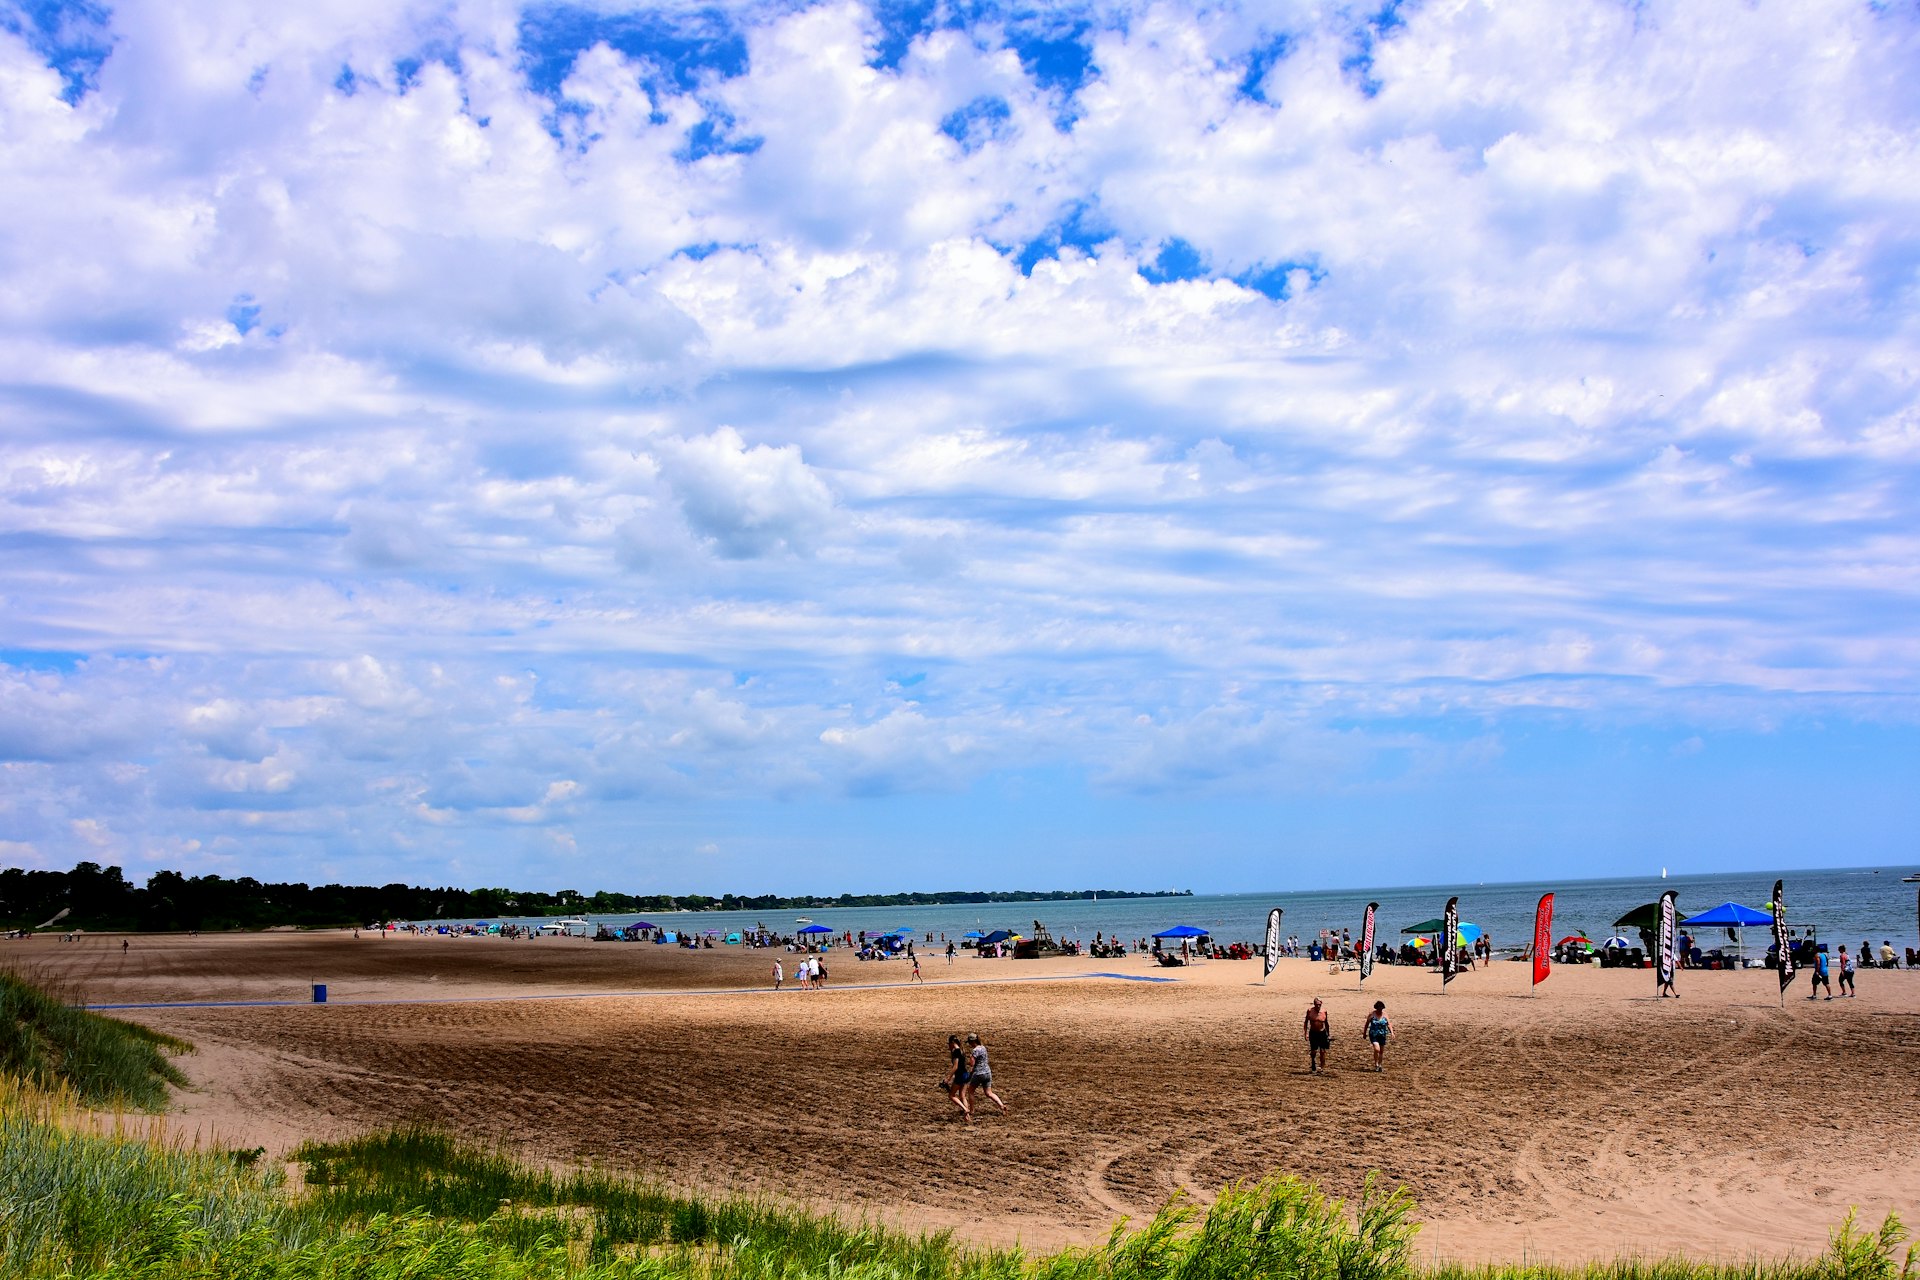 Many people enjoying the beach activities at North Beach on a beautiful summer day with clouded skies above the cool waters of Lake Michigan